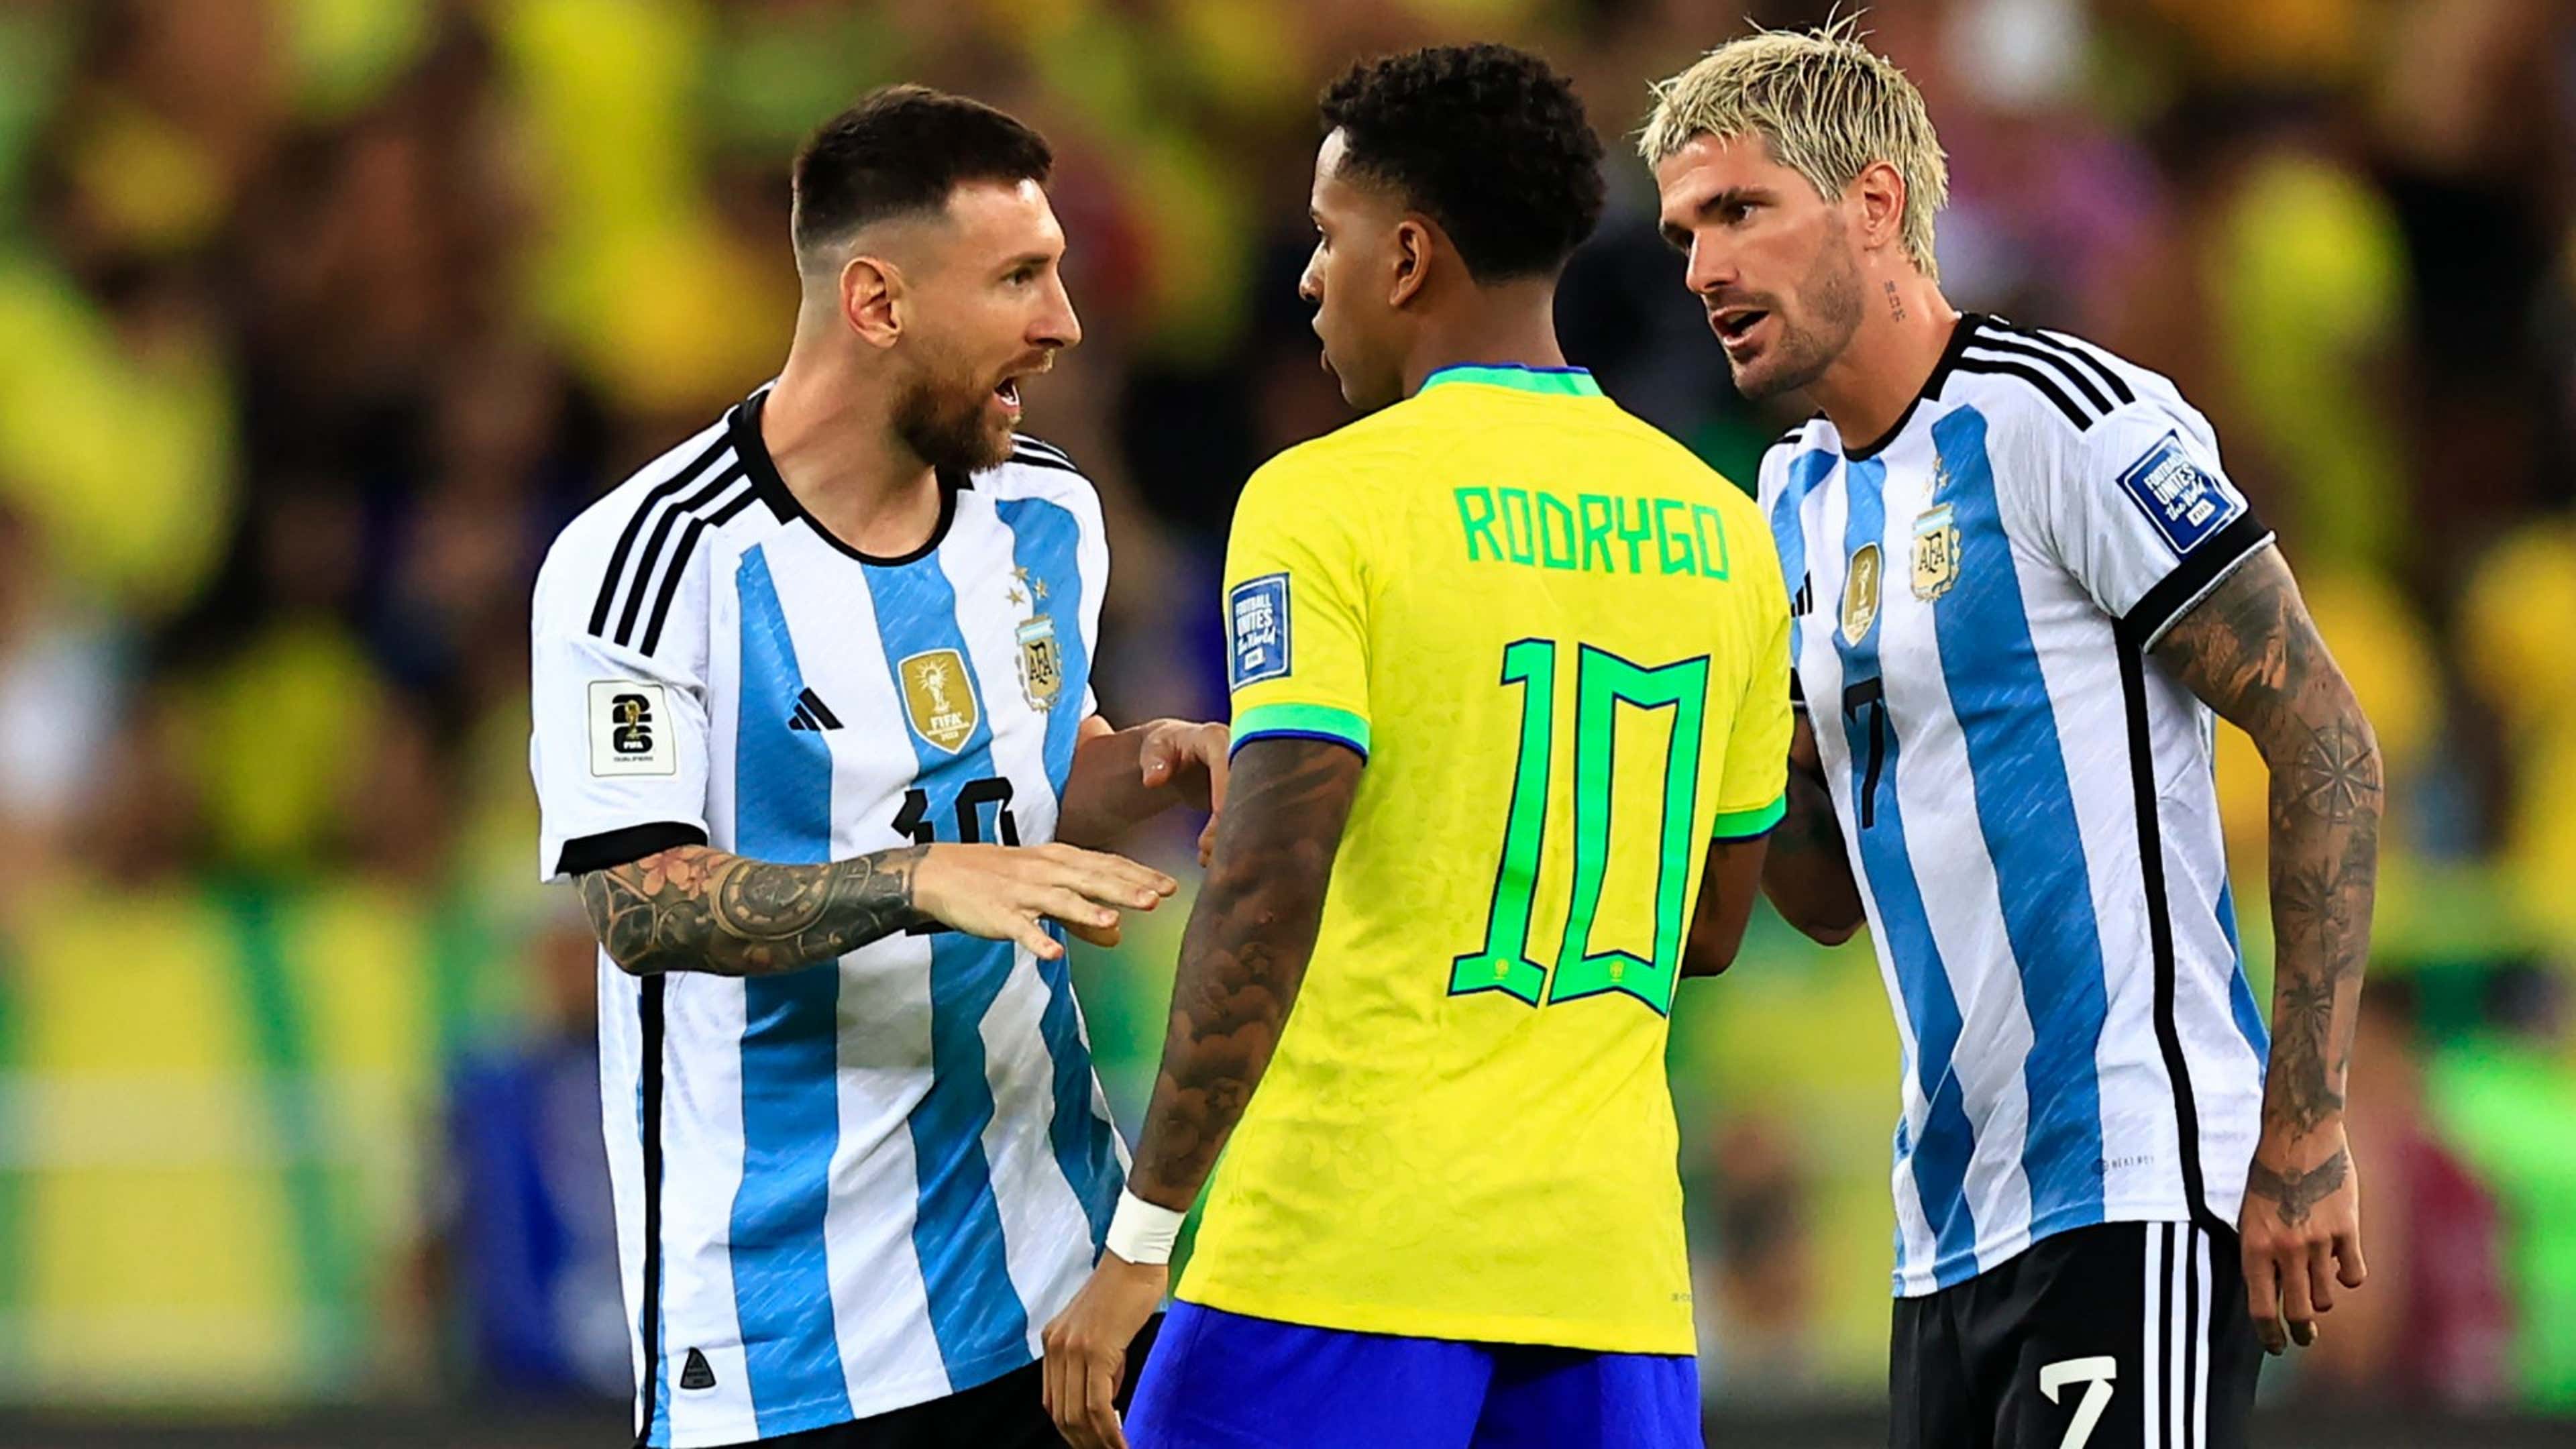 WATCH: 'Watch your mouth!' - Lionel Messi rages at Rodrygo after running to  back up Rodrigo De Paul in heated exchange as Argentina return to the pitch  following 30-minute kick-off delay vs